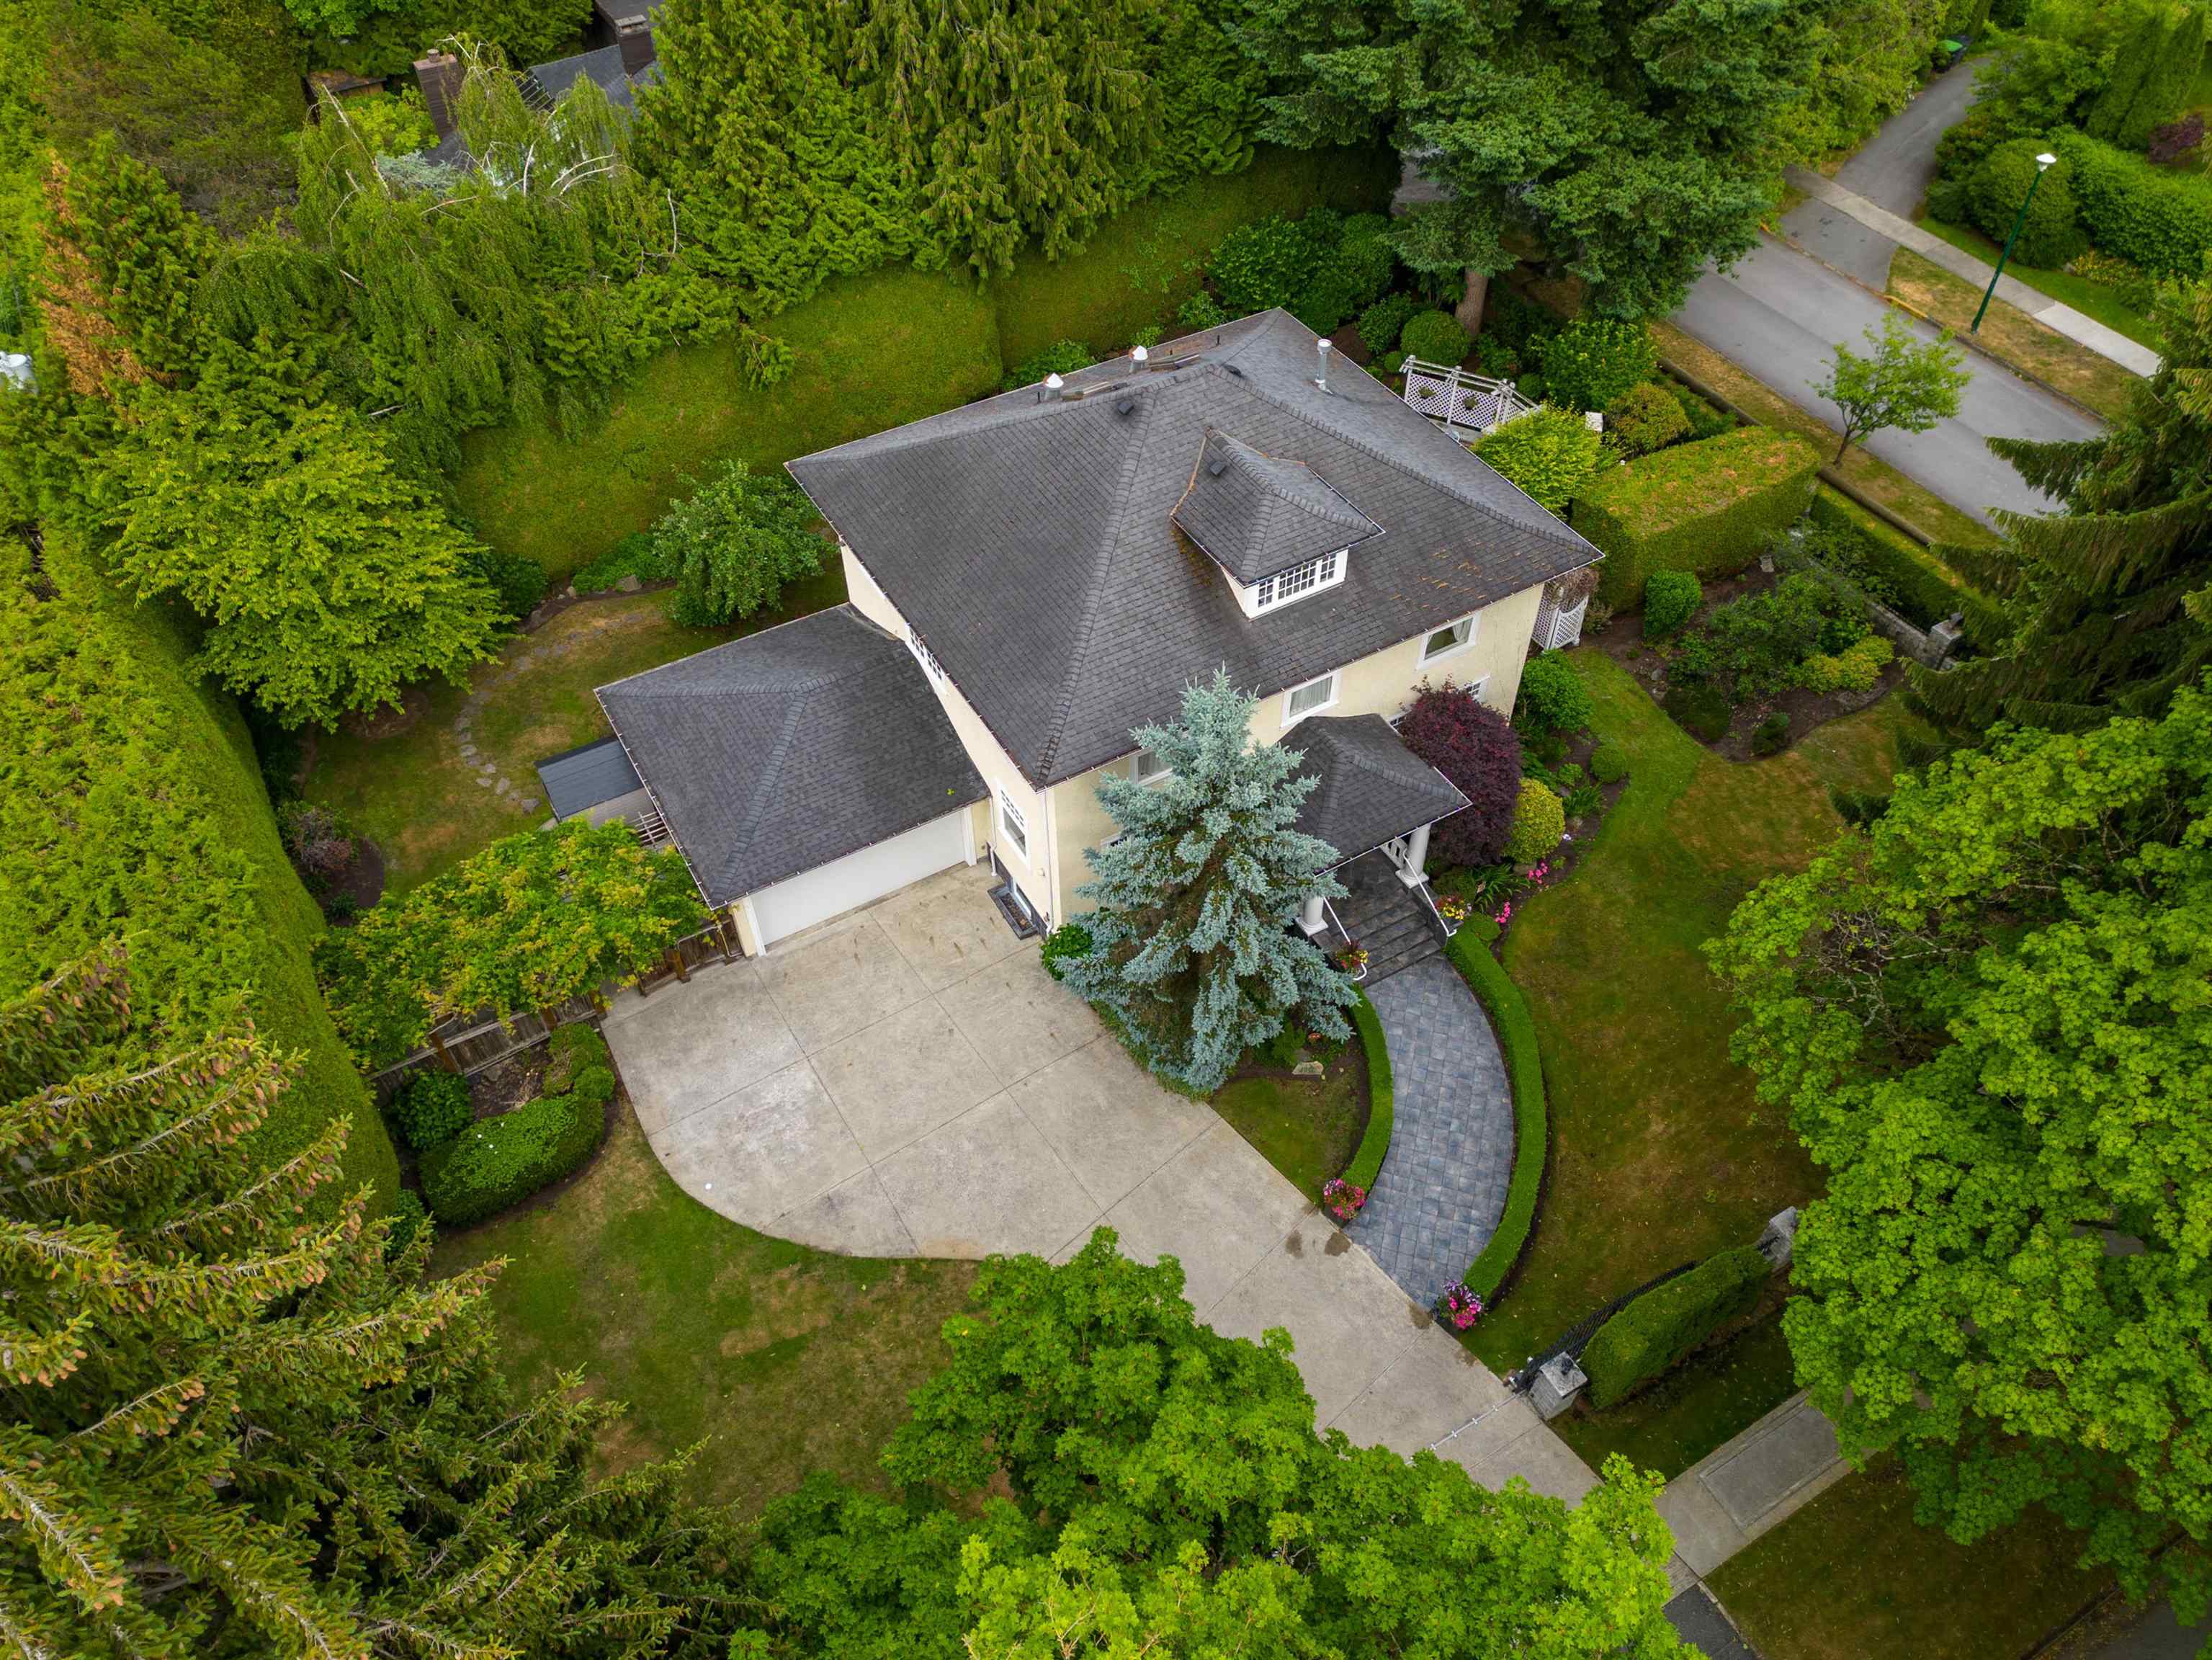 Listing image of 4950 CONNAUGHT DRIVE